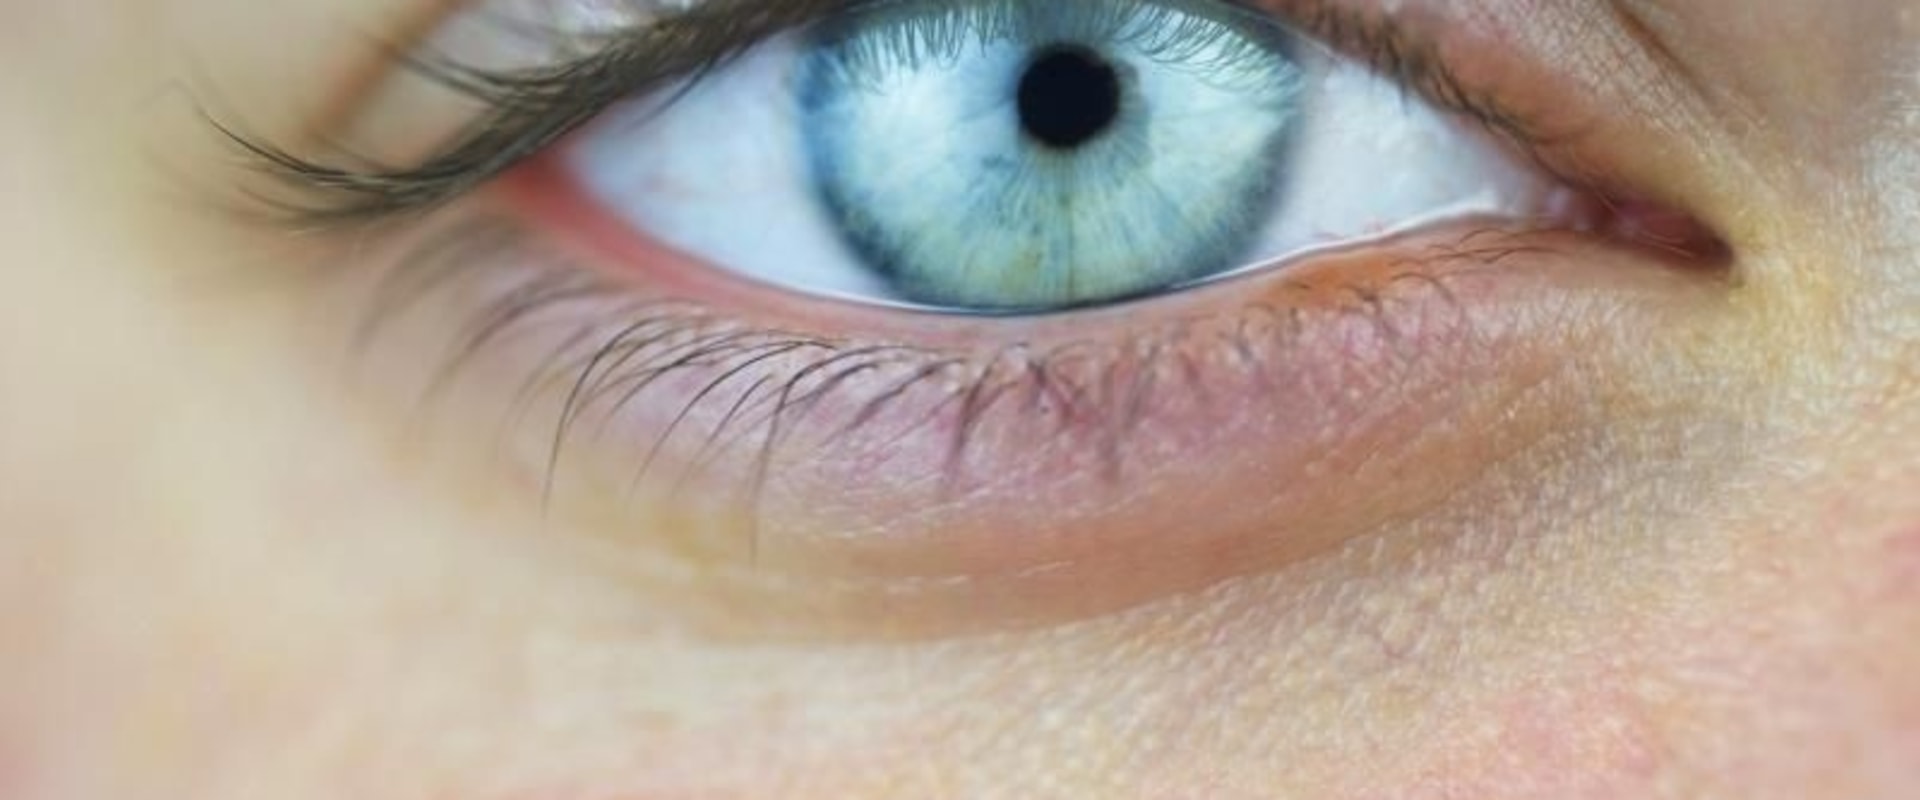 The 10 Most Common Eye Problems and How to Treat Them